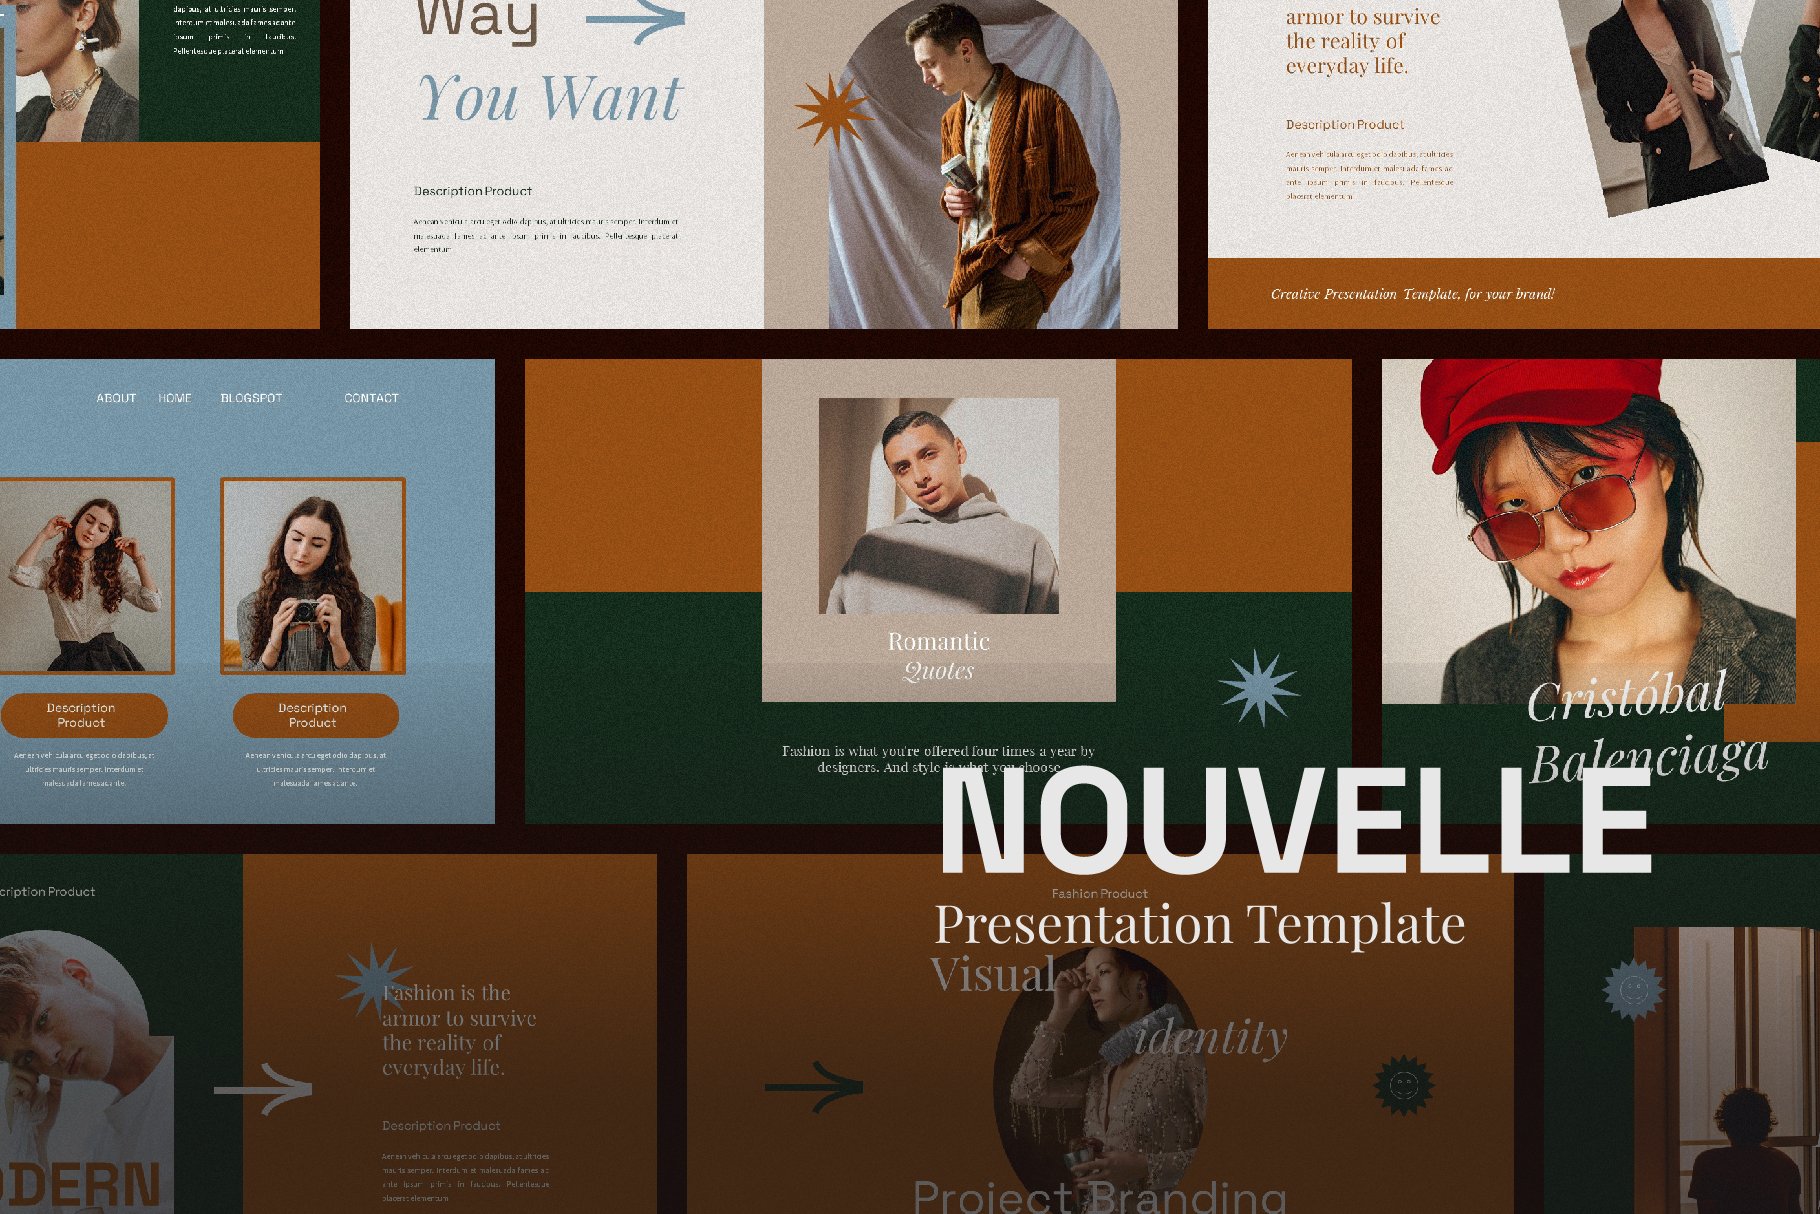 This template is premium for stylish and expensive presentations.